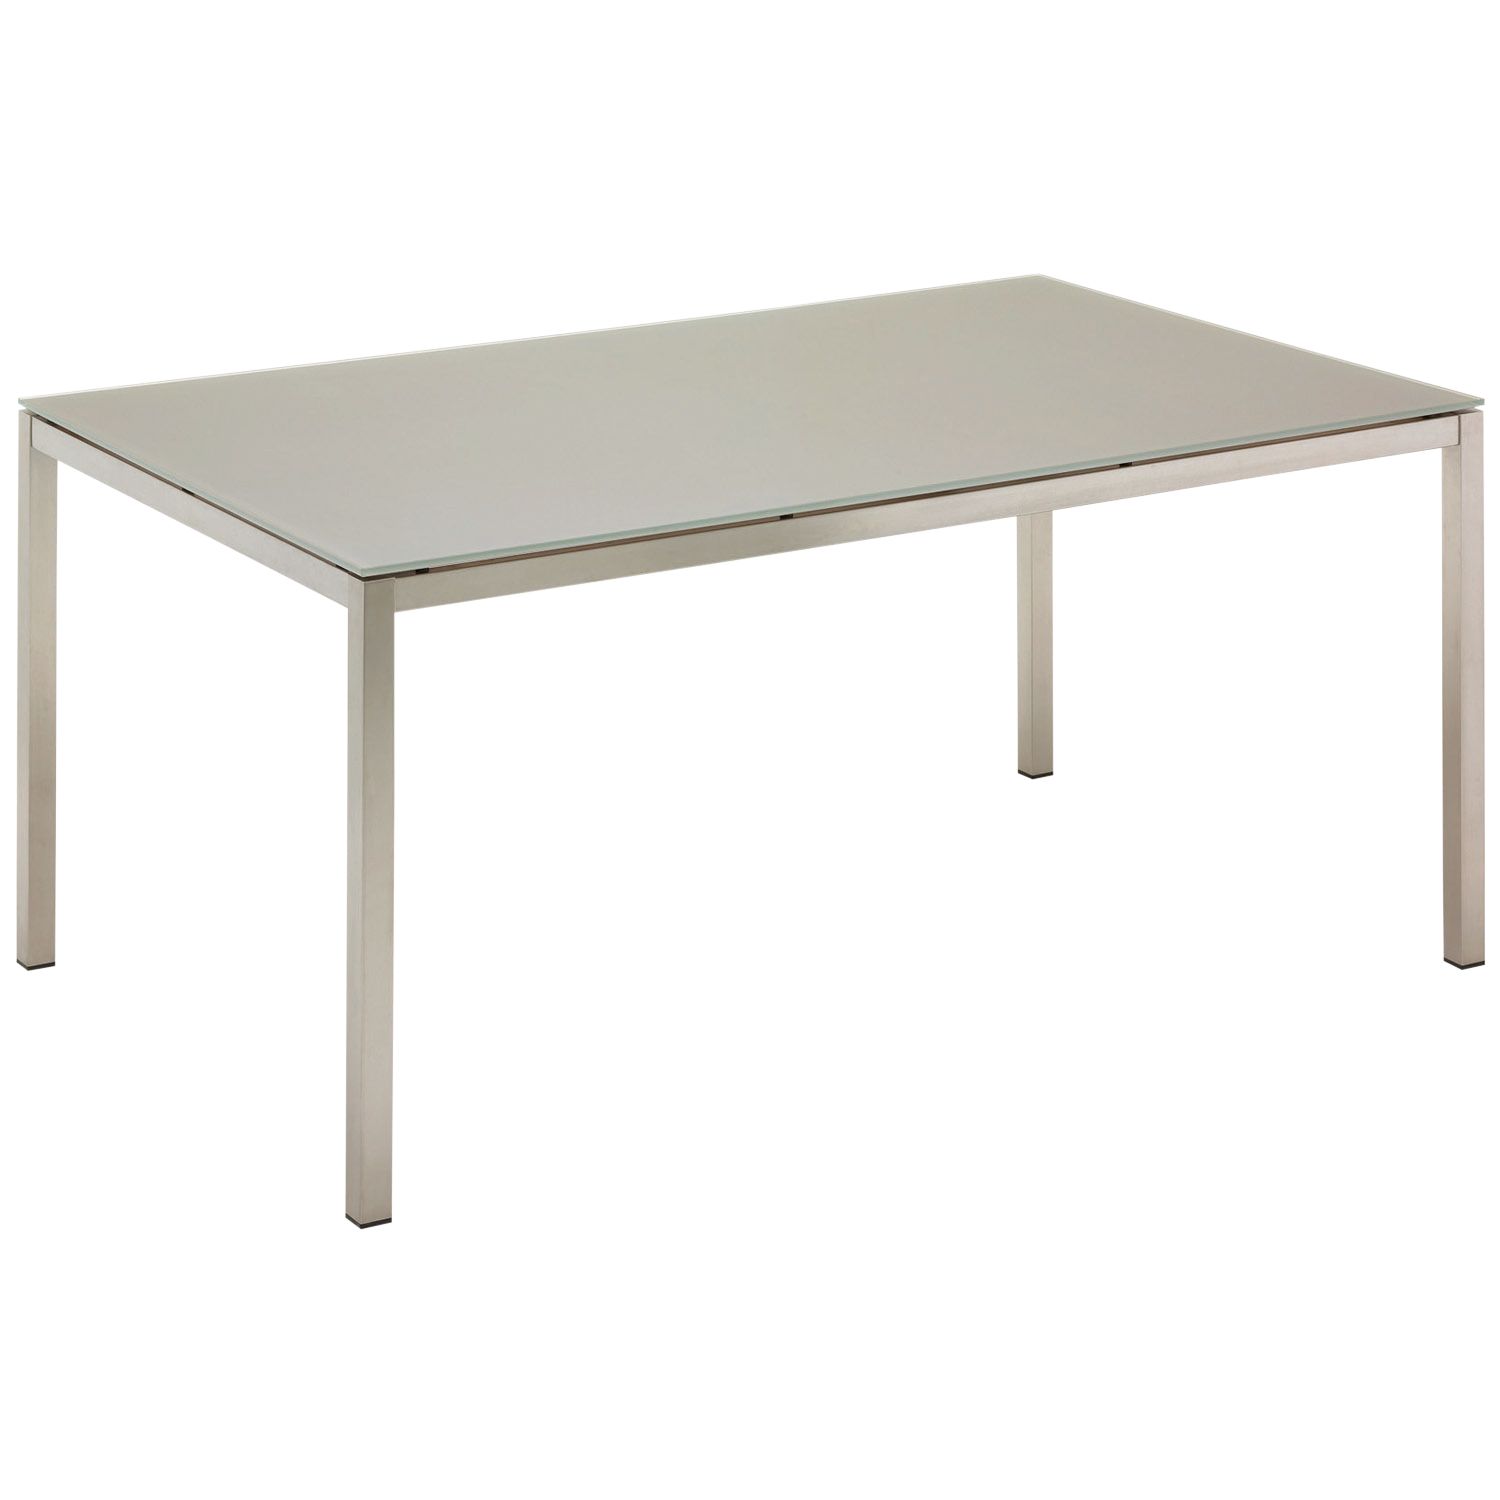 Gloster Kore Rectangular 6 Seater Outdoor Dining Table, Taupe HPL, width 162cm